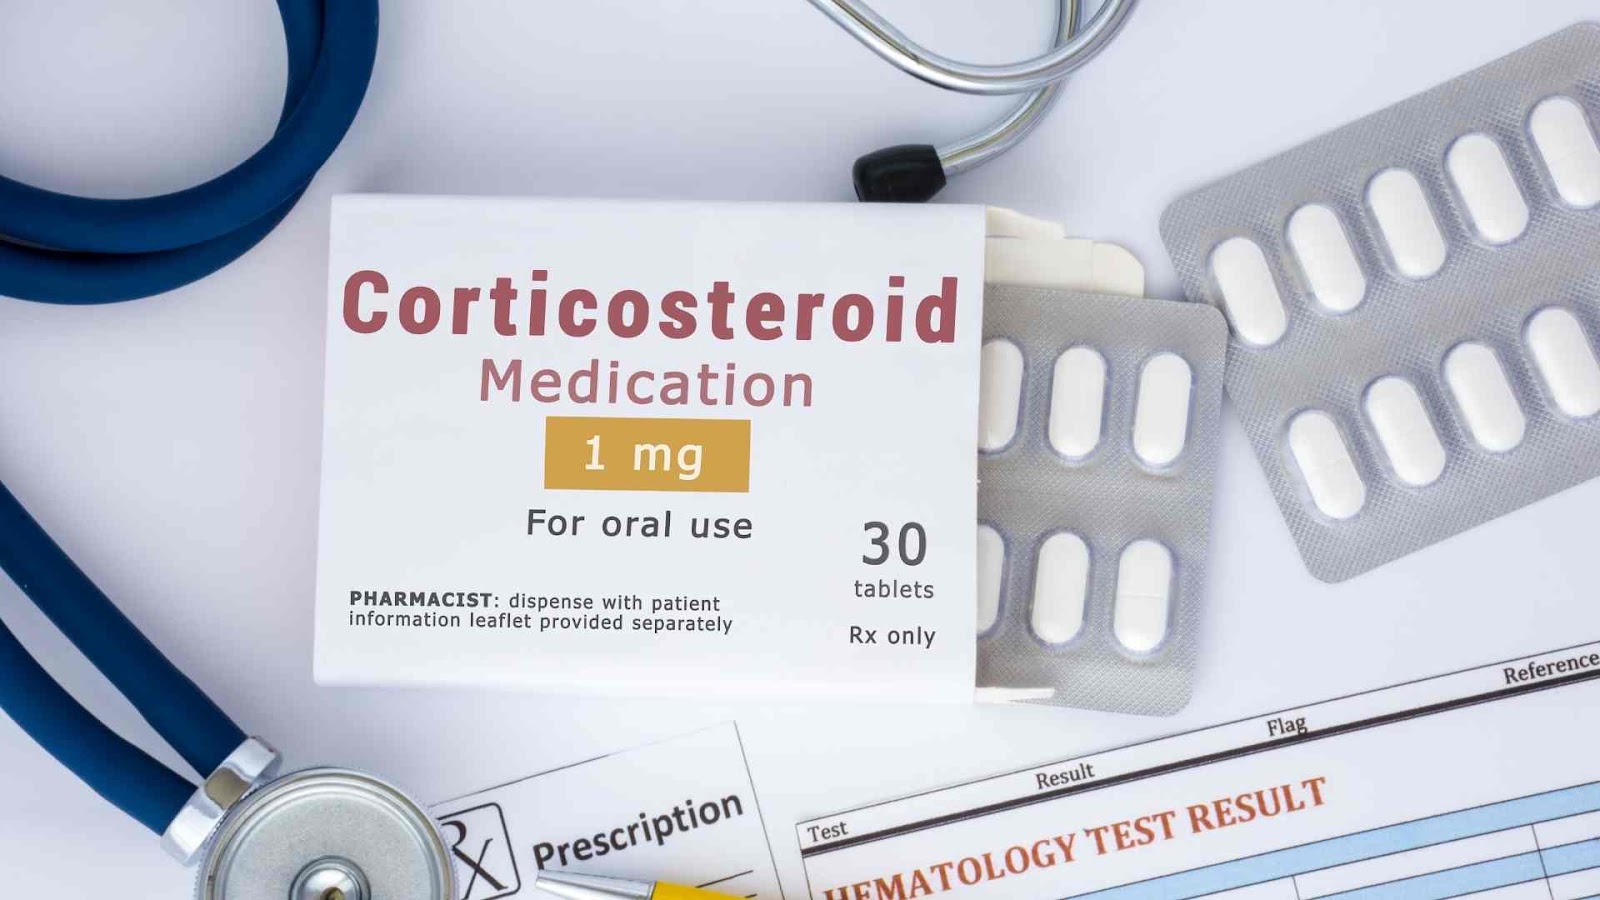 Corticosteroid box. Topical steroids like hydrocortisone are popular, but how long do they take to work?